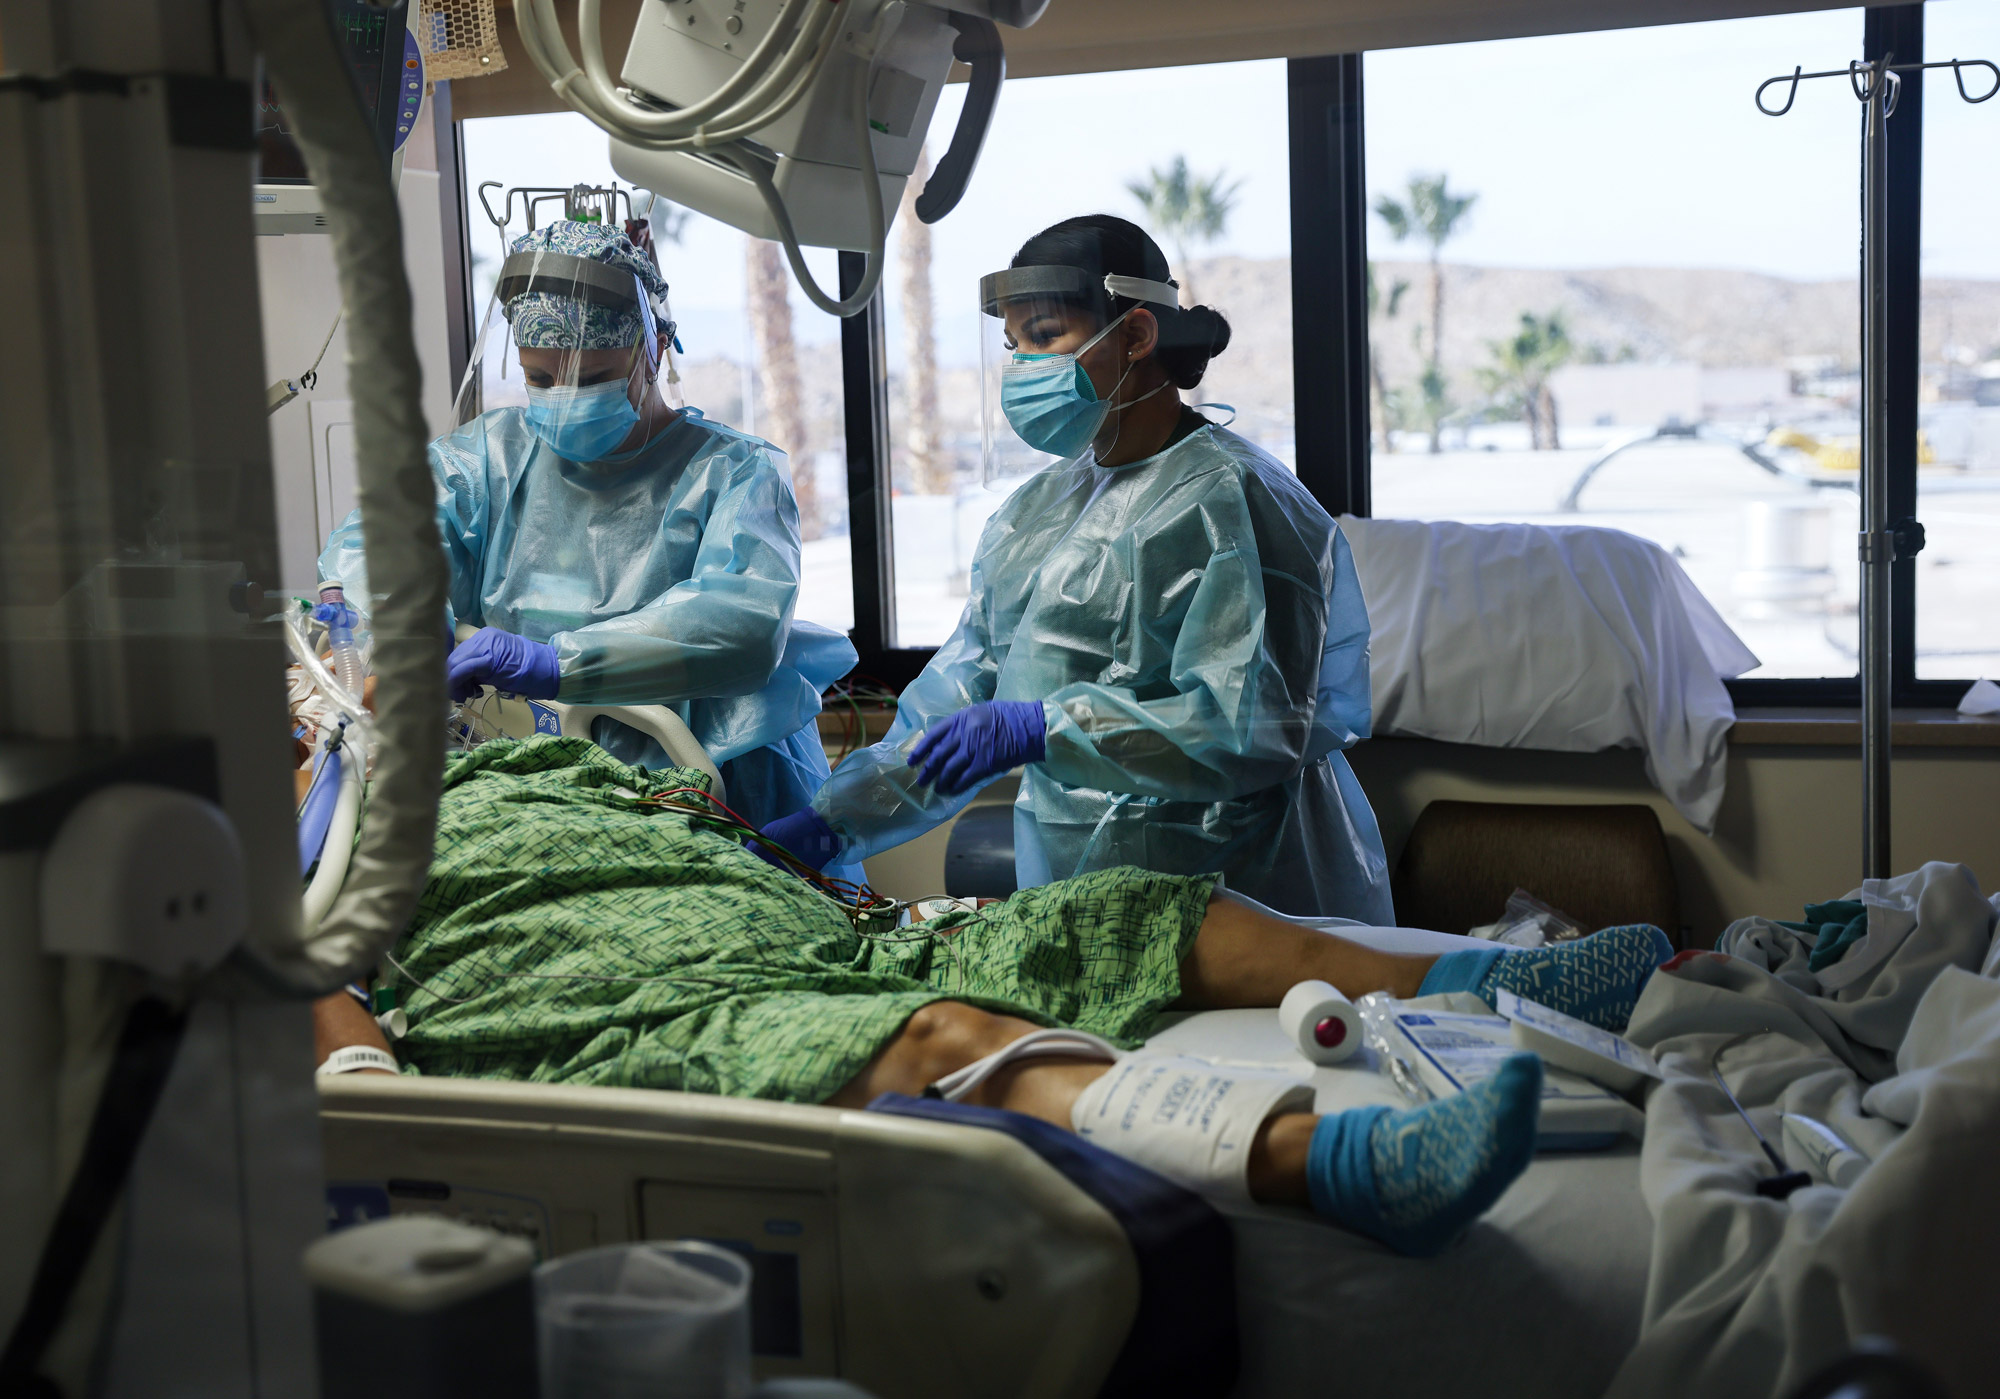 Clinicians care for a COVID-19 patient in the Intensive Care Unit at Providence St. Mary Medical Center on December 23 in Apple Valley, California. 